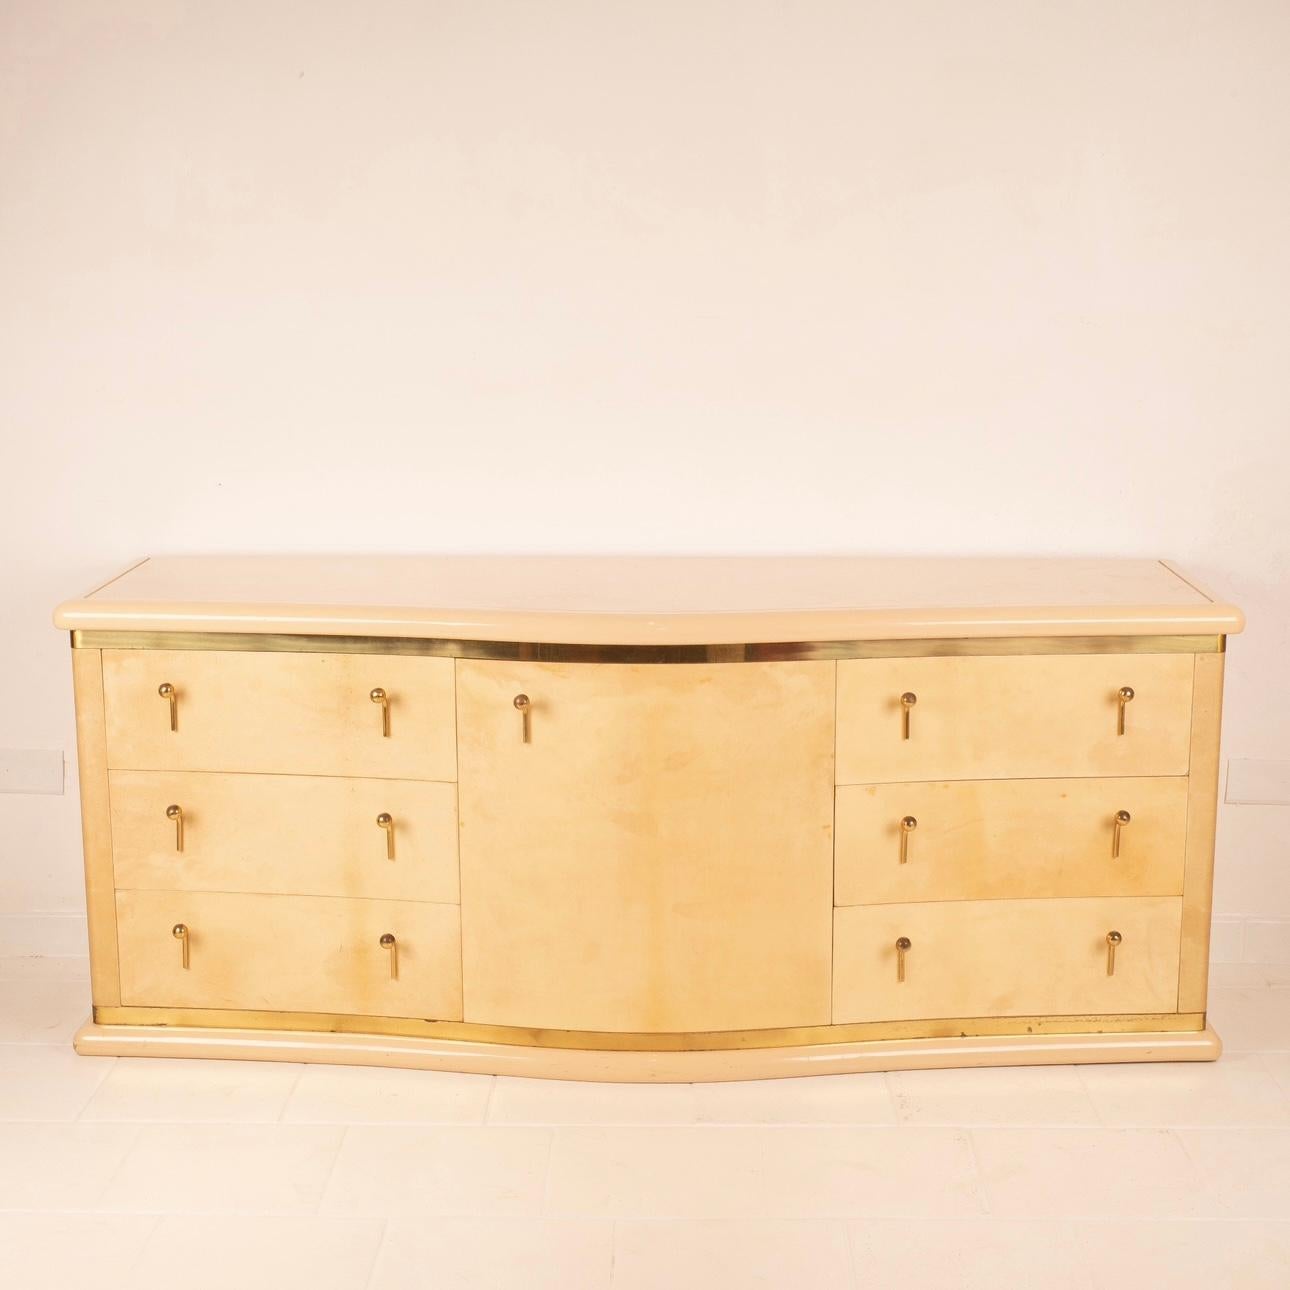 Mid-20th Century Curved parchment cabinet by Aldo Tura for Tura Milan 1960 For Sale